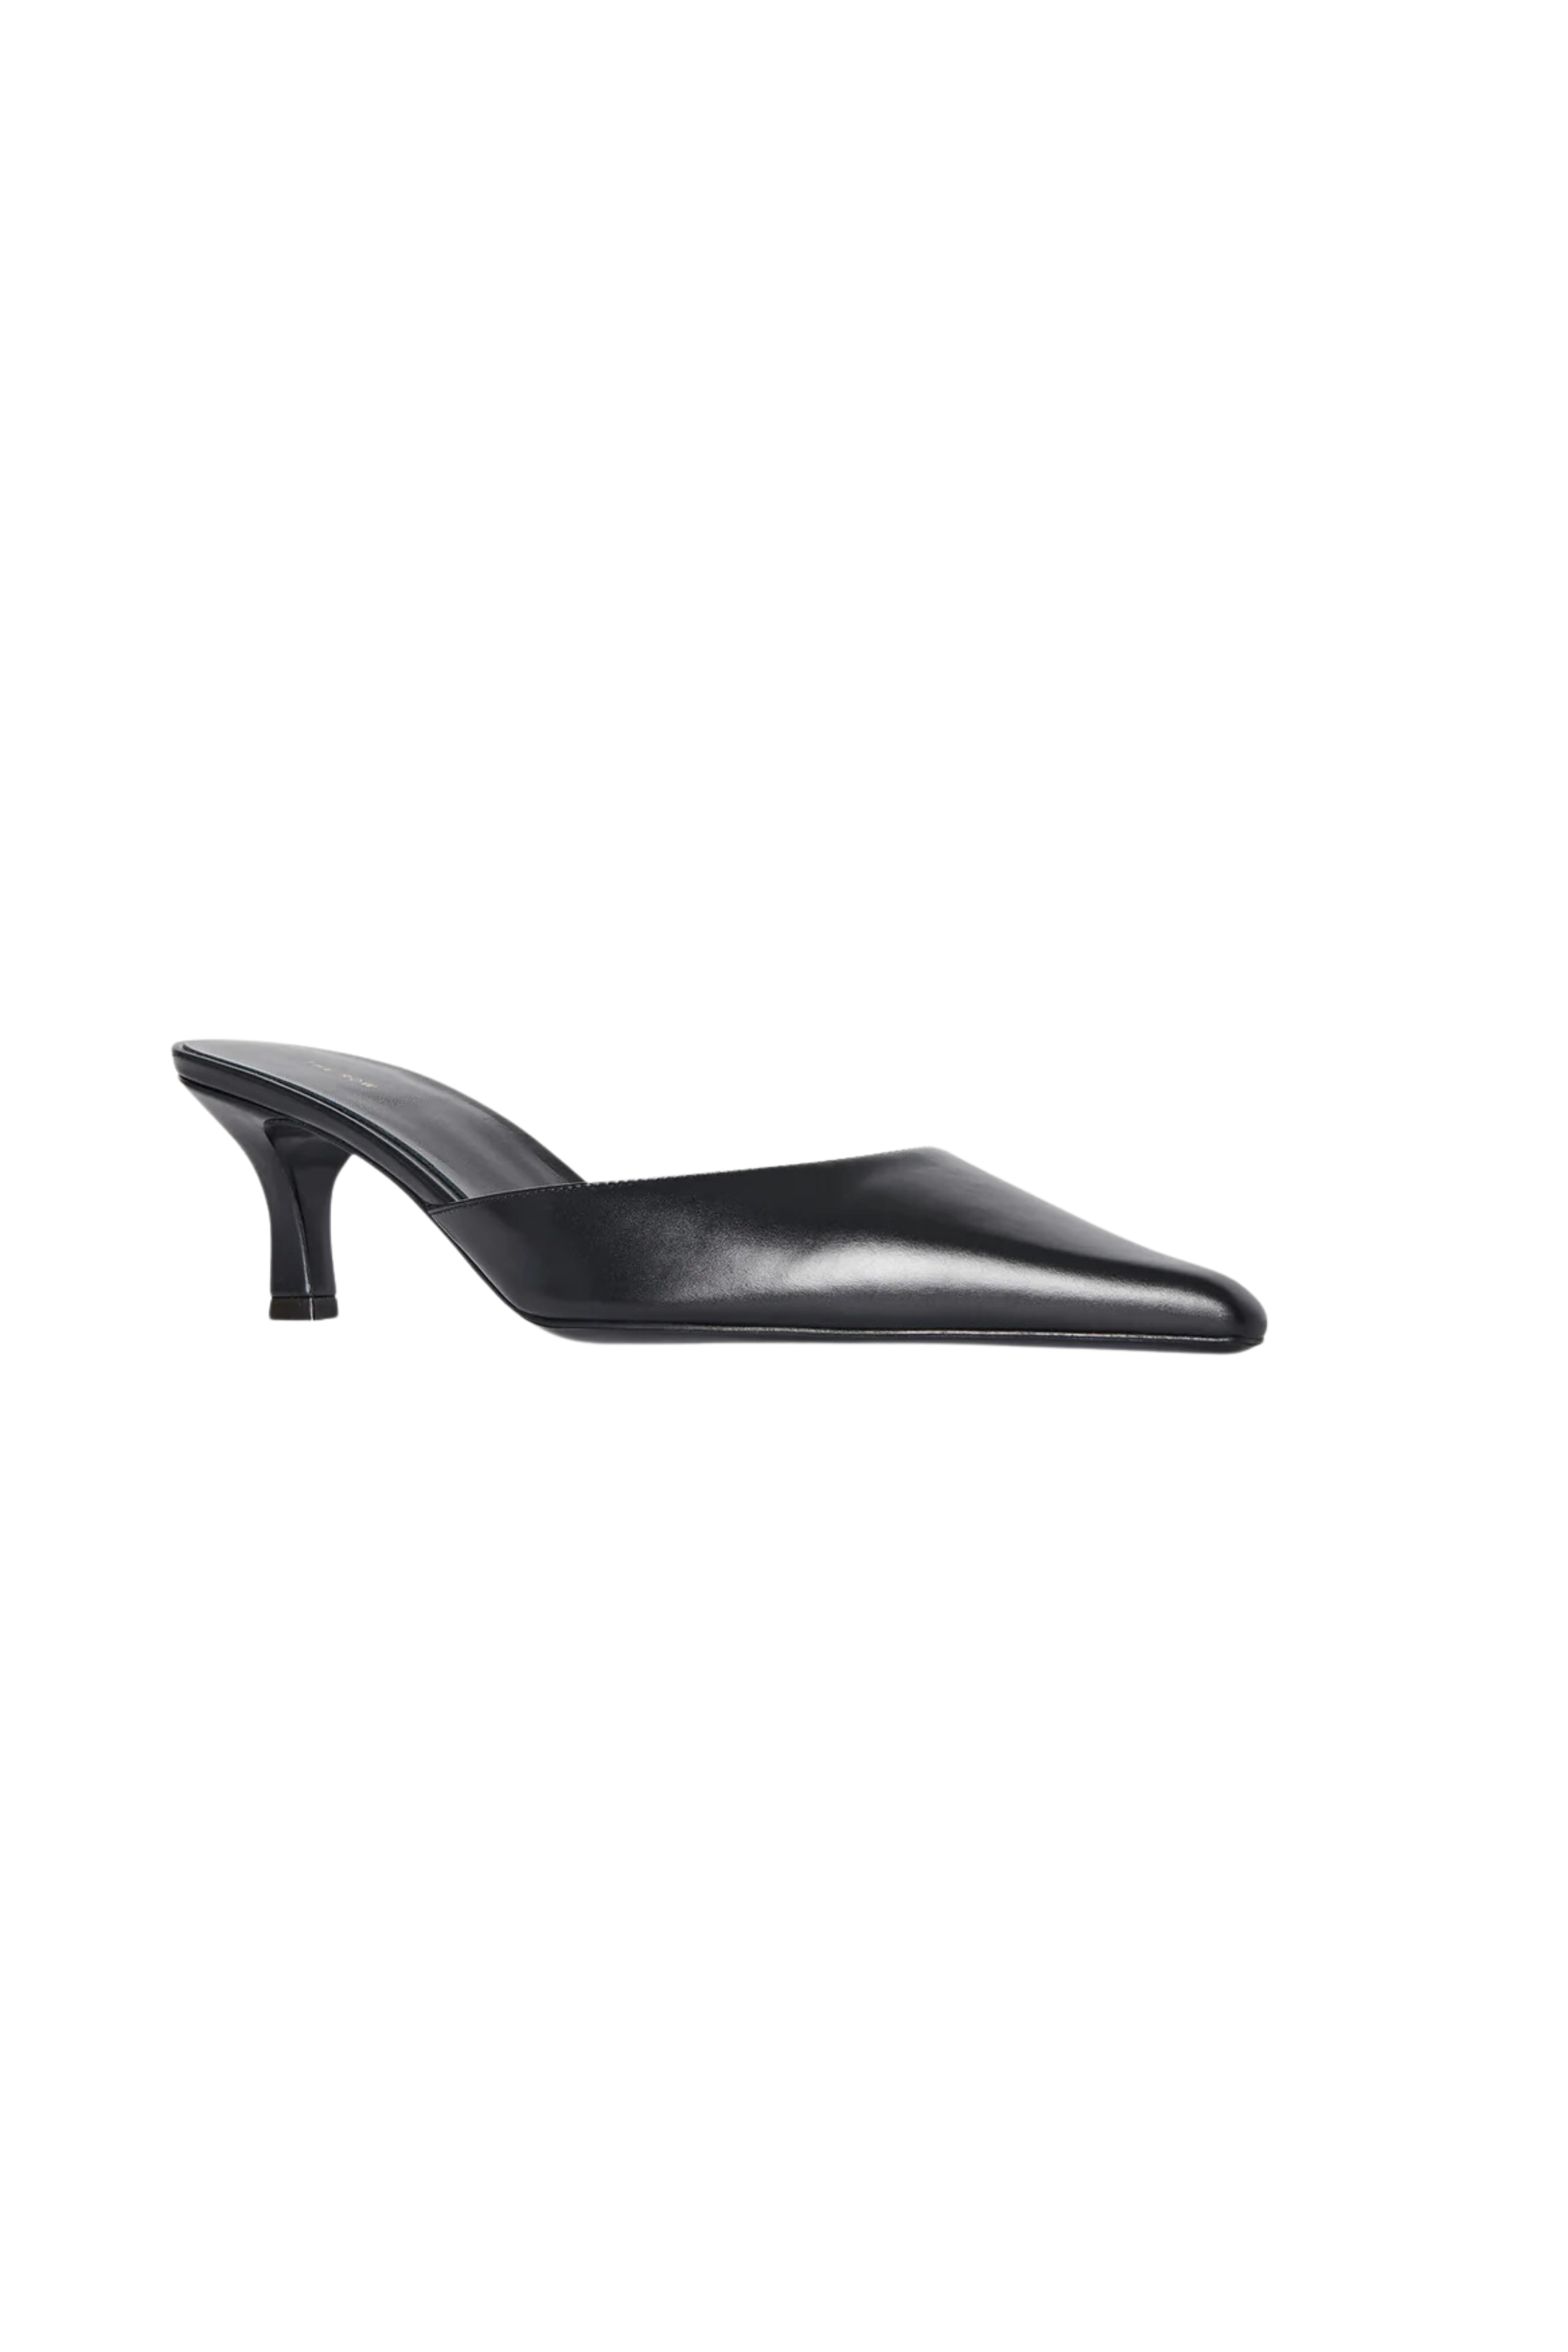 THE ROW Cybil Leather Mules